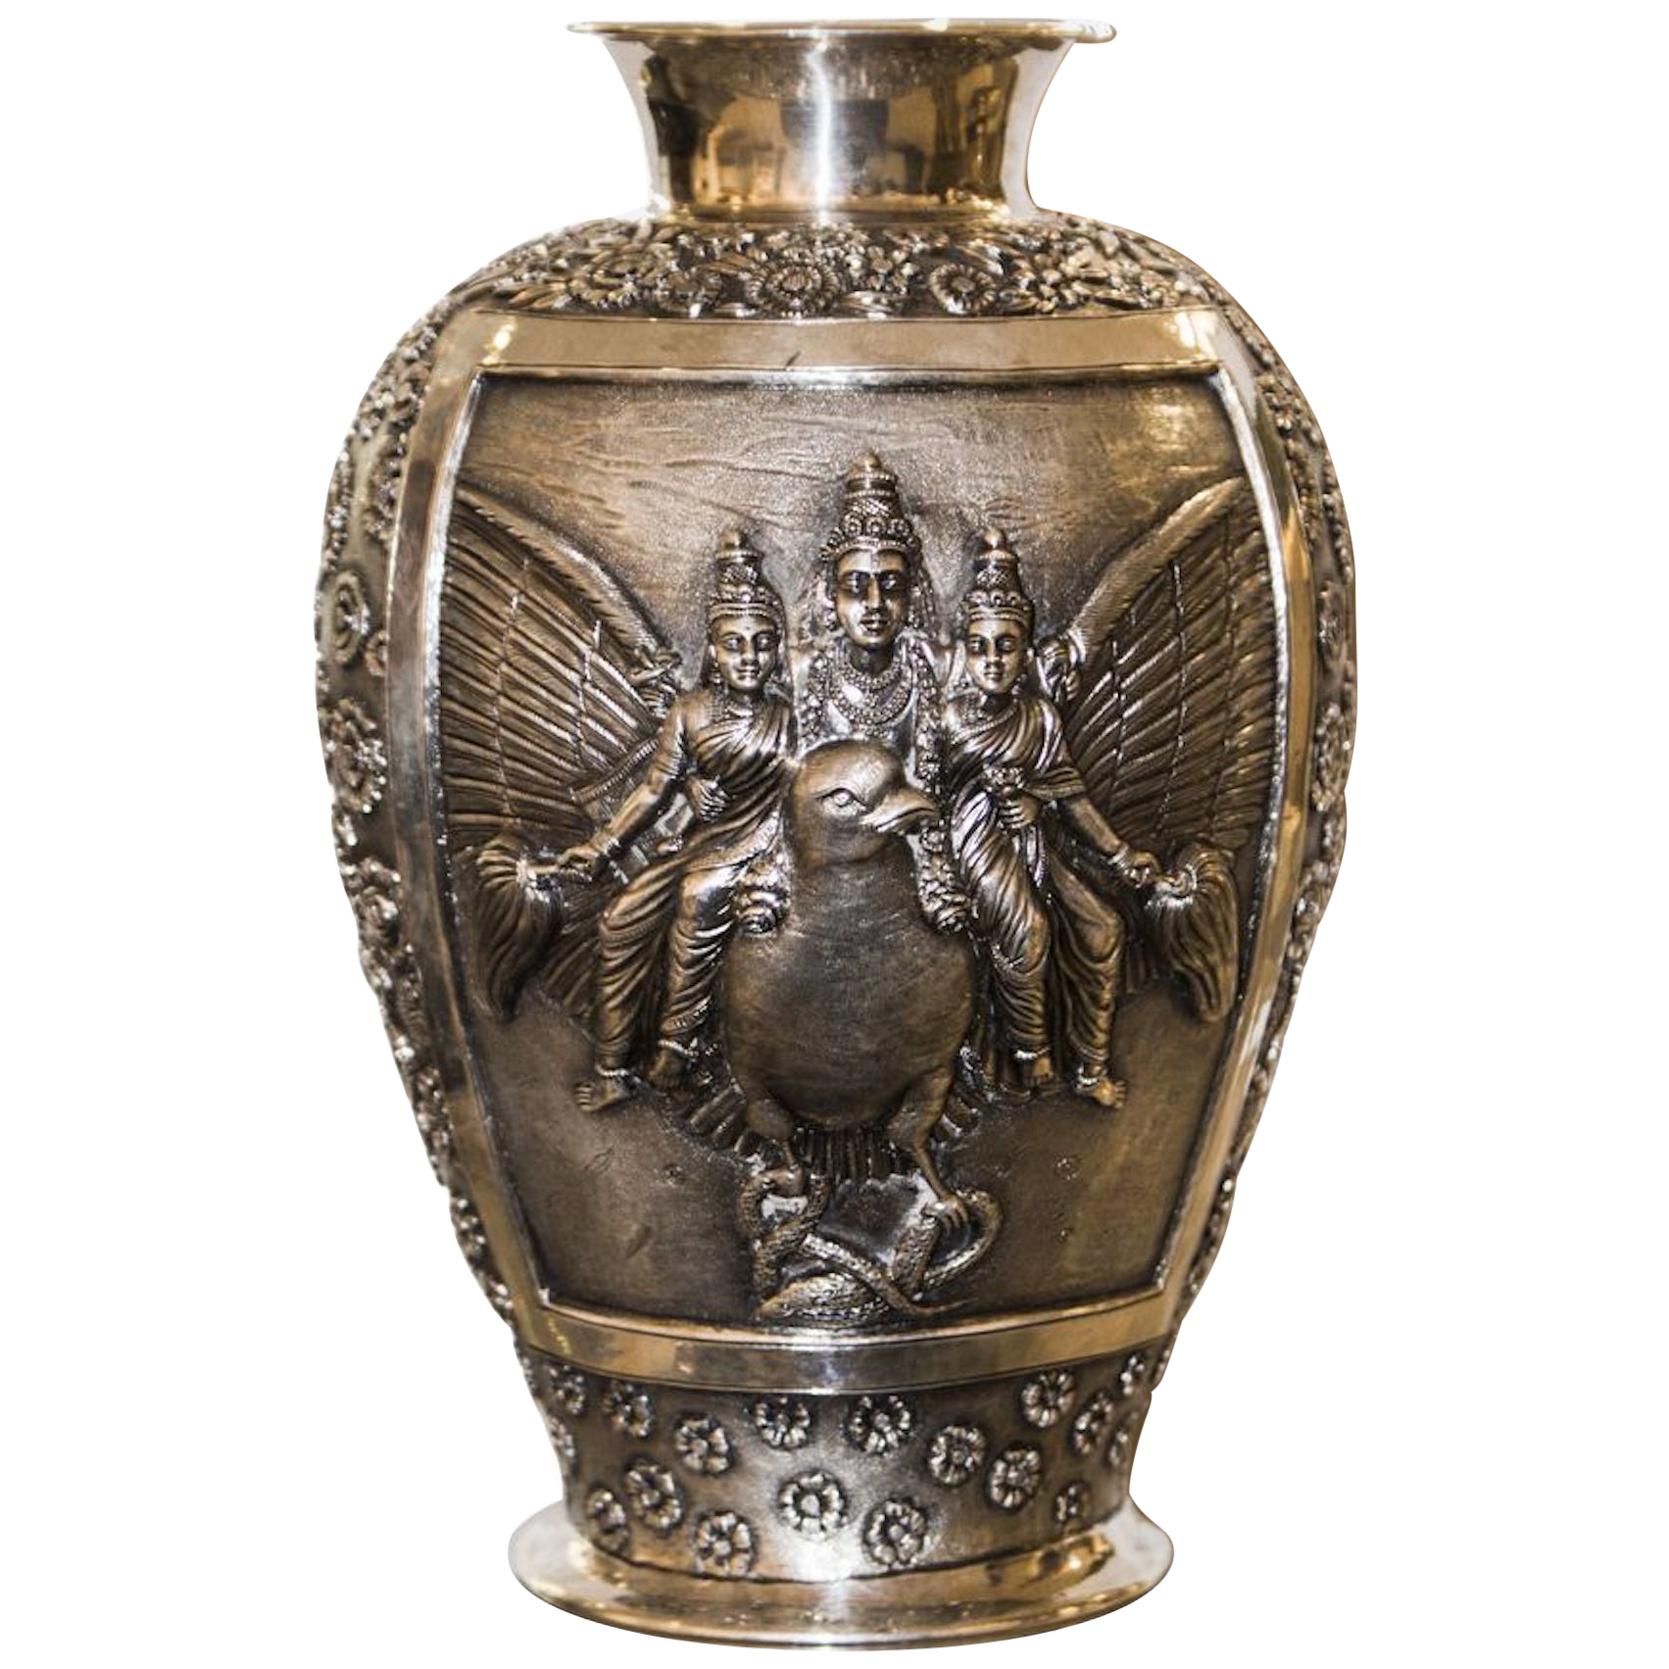 Silver Vase Oriental Manufacture of the Colonial Age, Early 1900